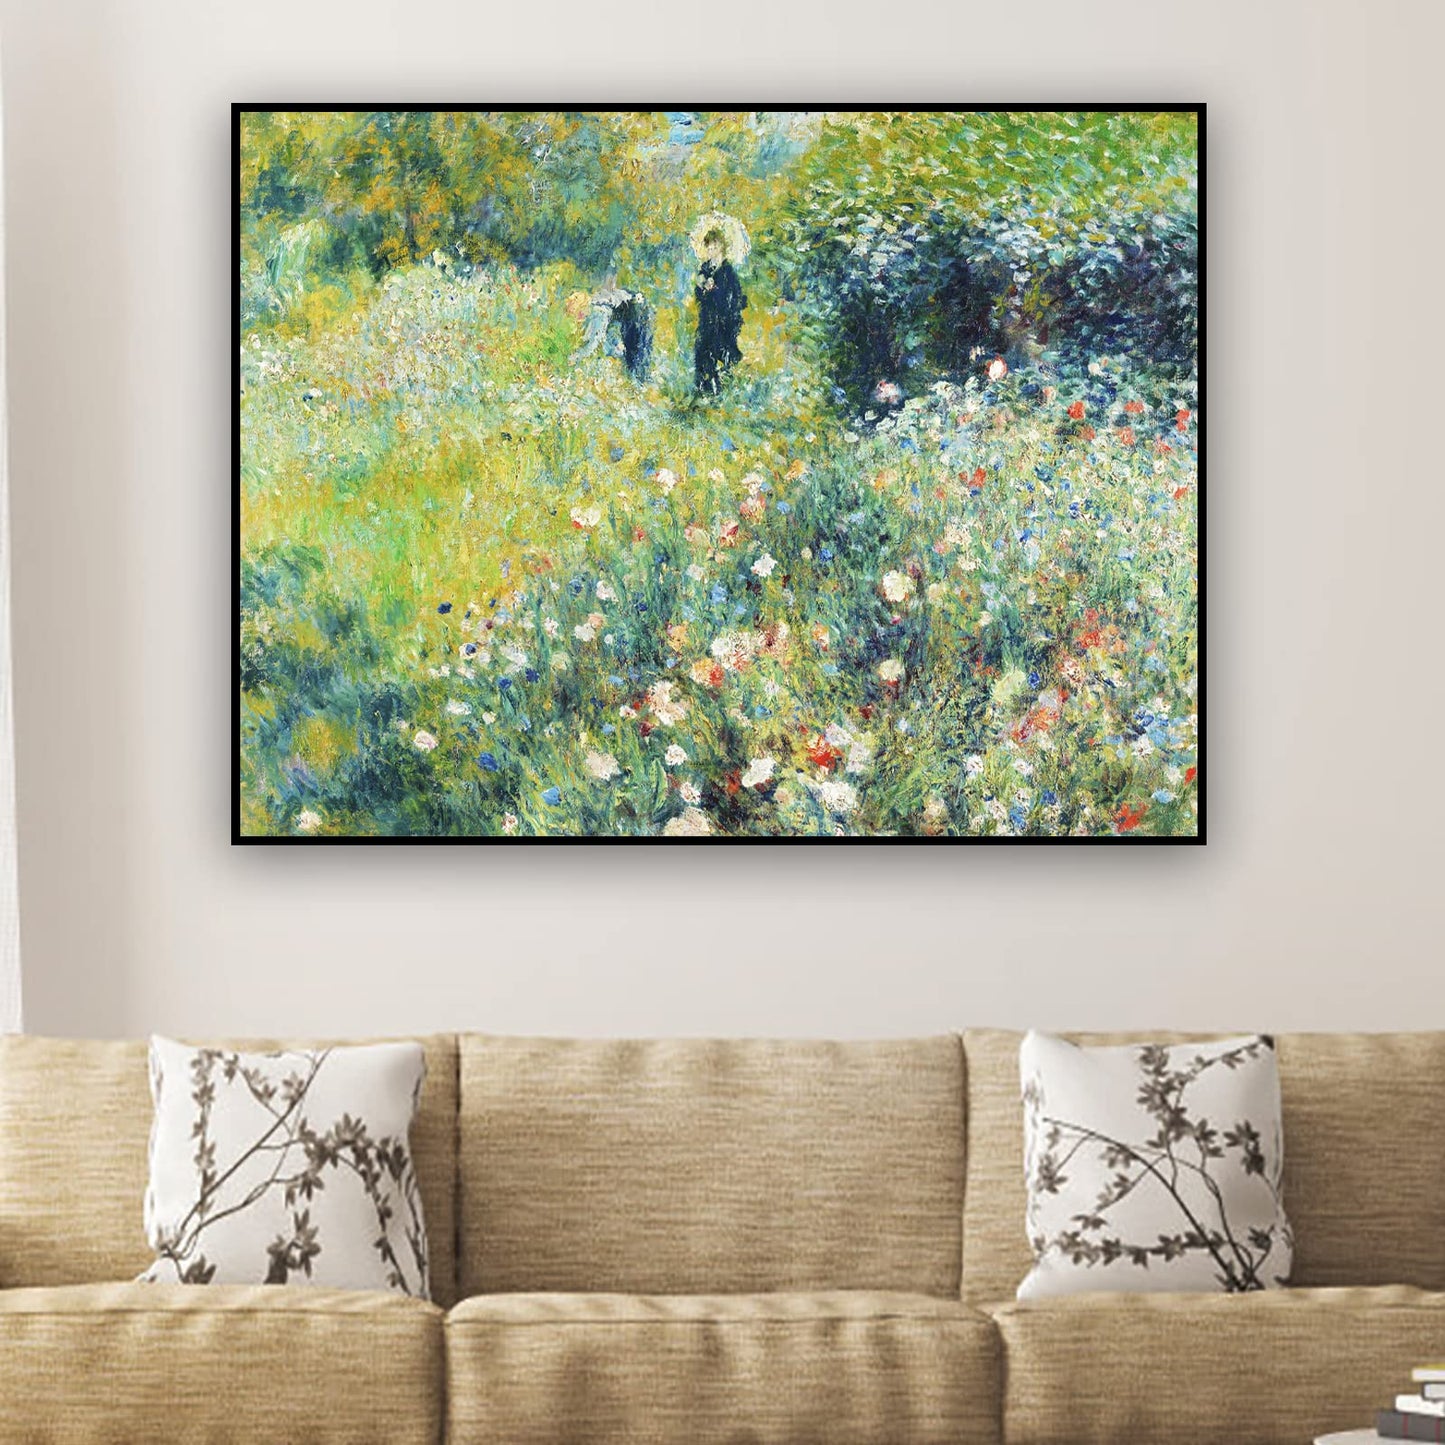 ZZPT Pierre Auguste Renoir Poster Print - Summer Landscape Canvas Wall Art - Oil Painting Reproduction Abstract Wall Decor for Living Room Office Unframed (12x16in/30x40cm)